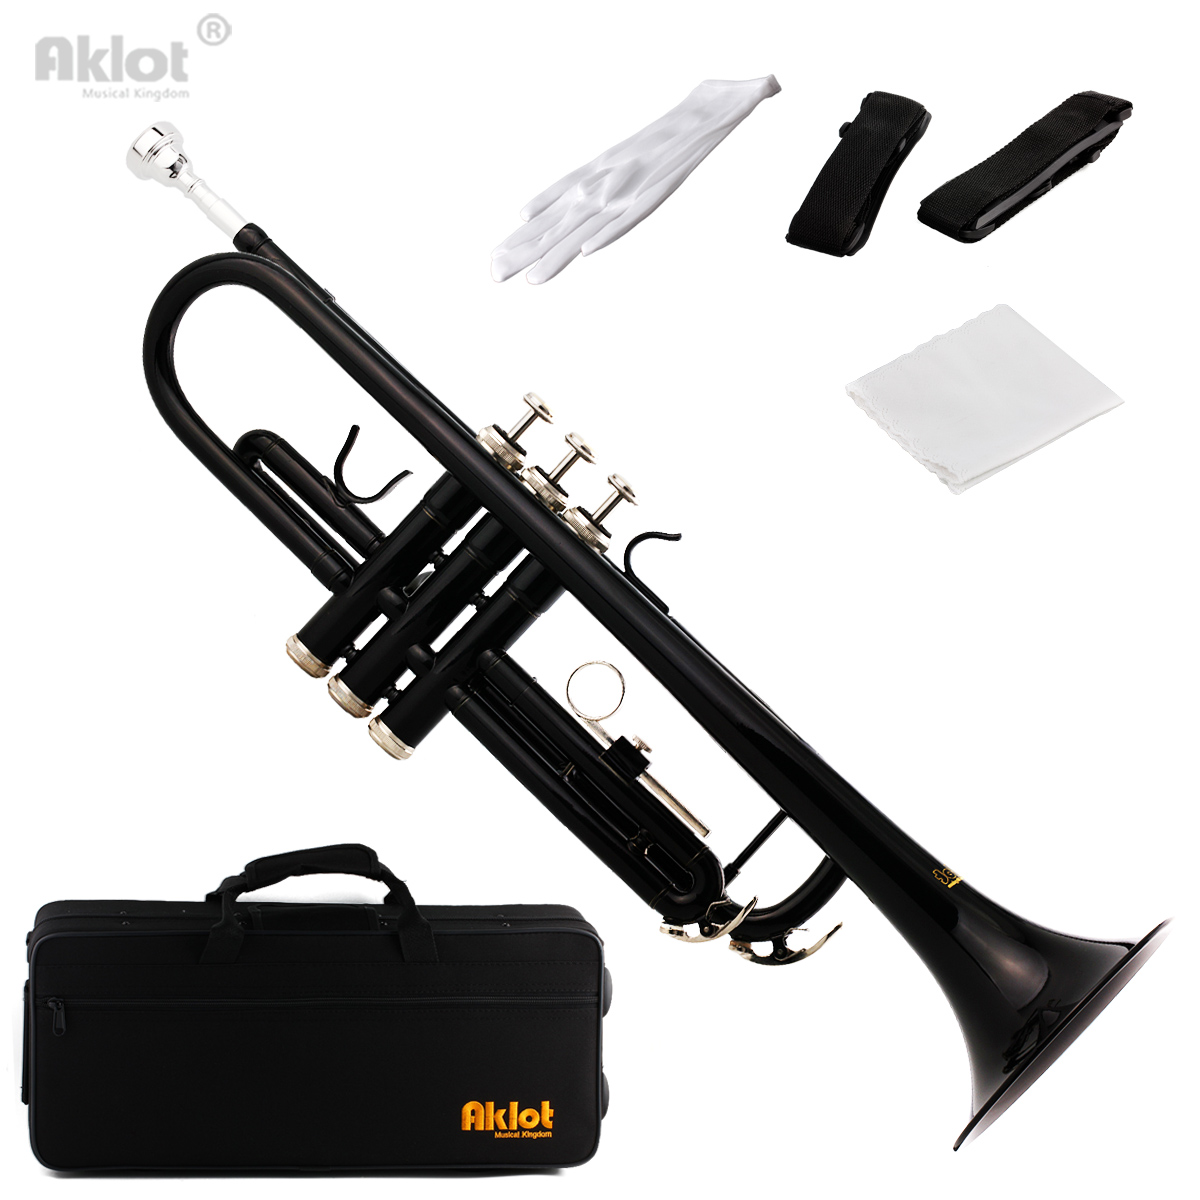 Aklot Bb B Flat Beginner Trumpet with 7C Silver Plated Mouthpiece Black Lacquered Brass Body for Student Band